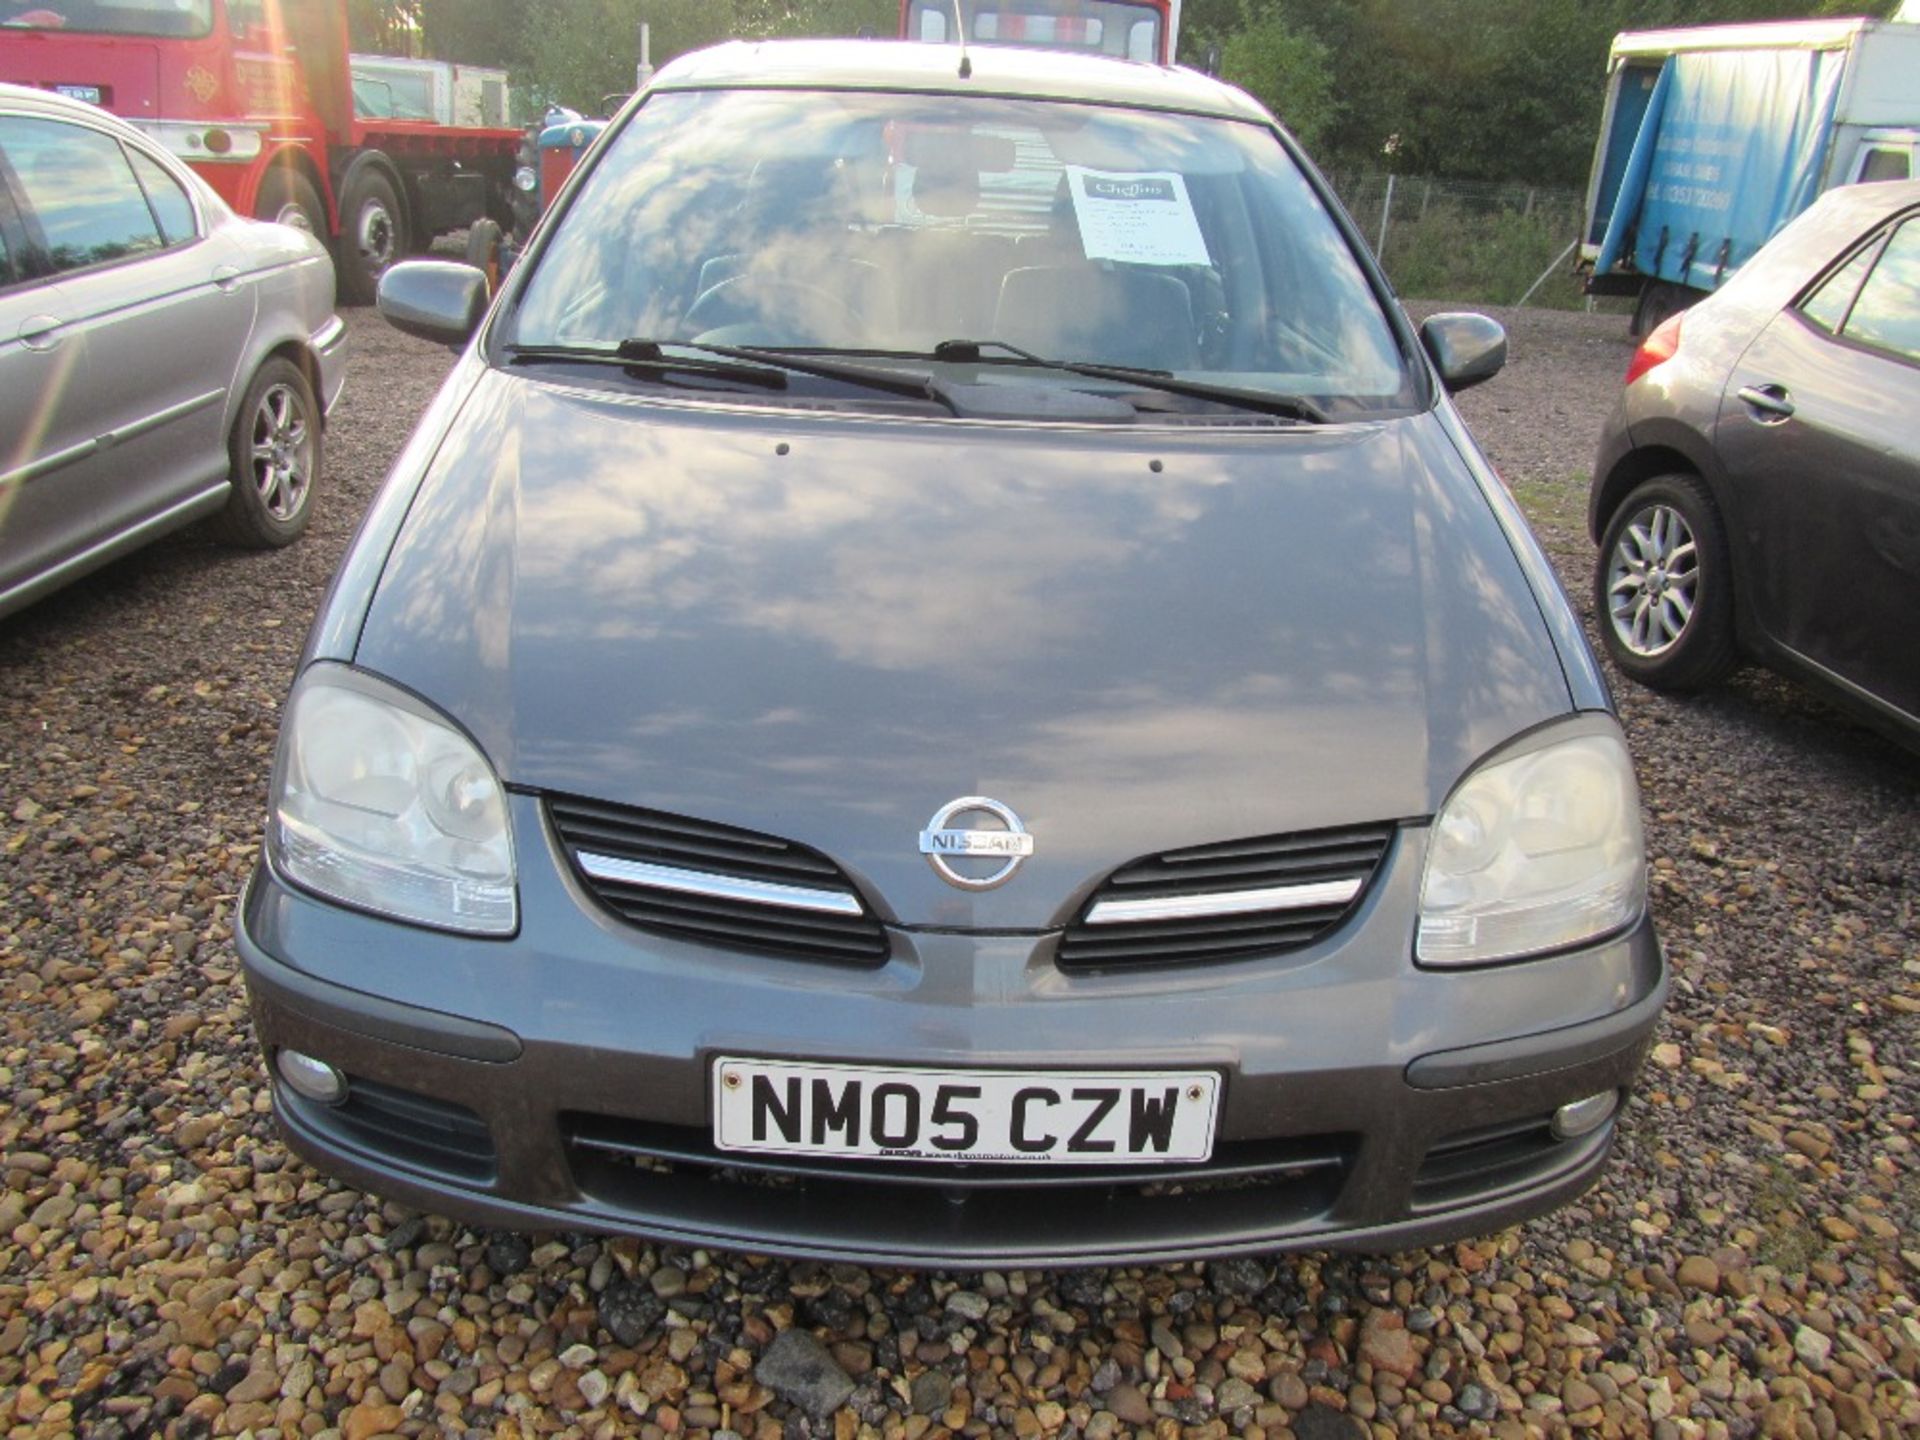 2005 Nissan Almera Tino - Spares & Repairs, Engine requires attention. Registration Documents will - Image 2 of 6